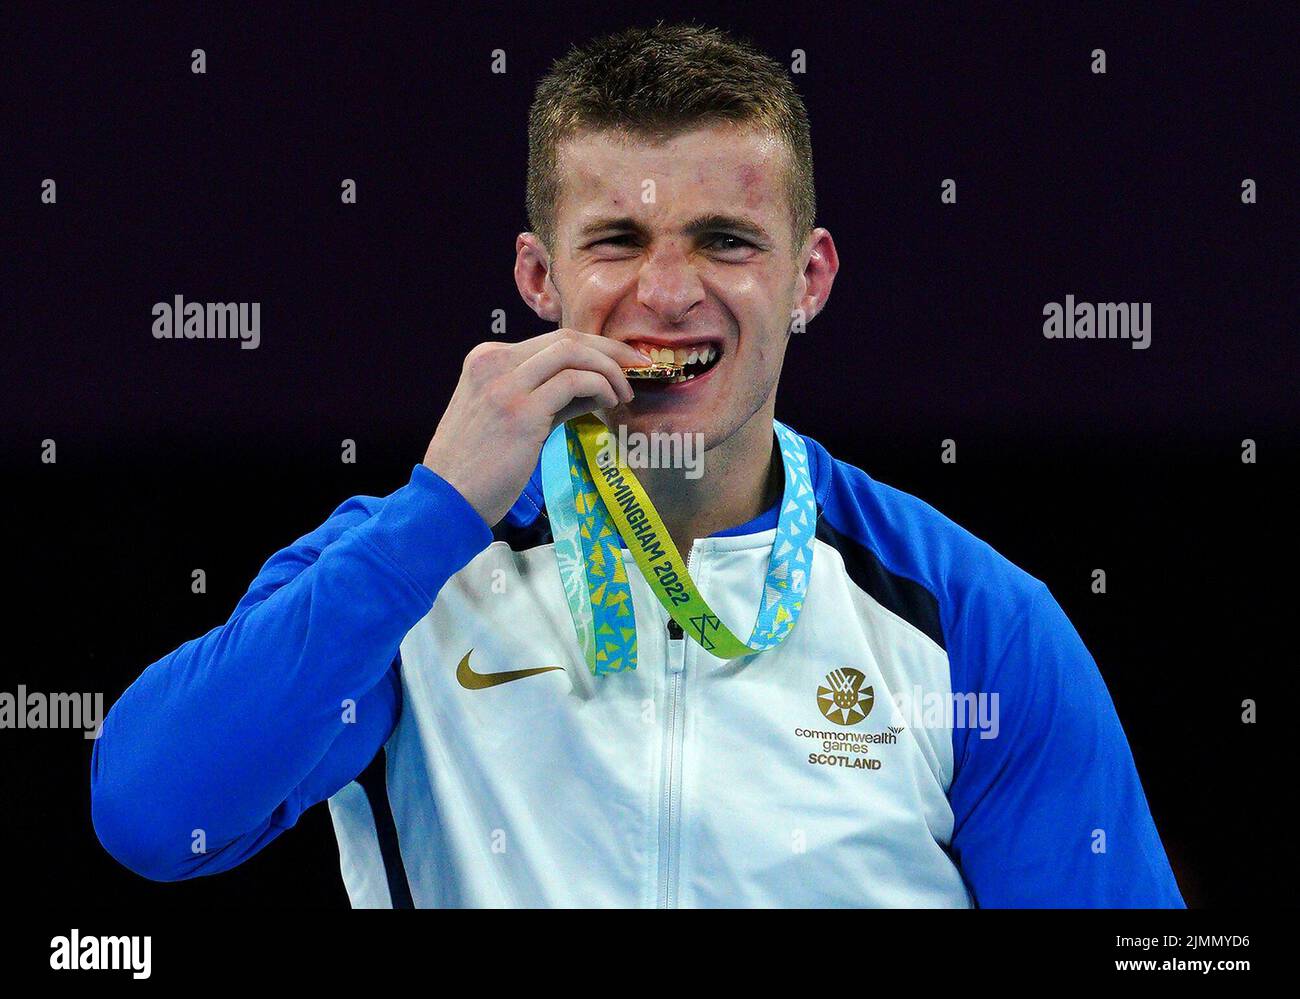 Scotland's Sean Lazzerini after winning gold in the Men's Light Heavy 75-80kg boxing at The NEC on day ten of the 2022 Commonwealth Games in Birmingham. Picture date: Sunday August 7, 2022. Stock Photo